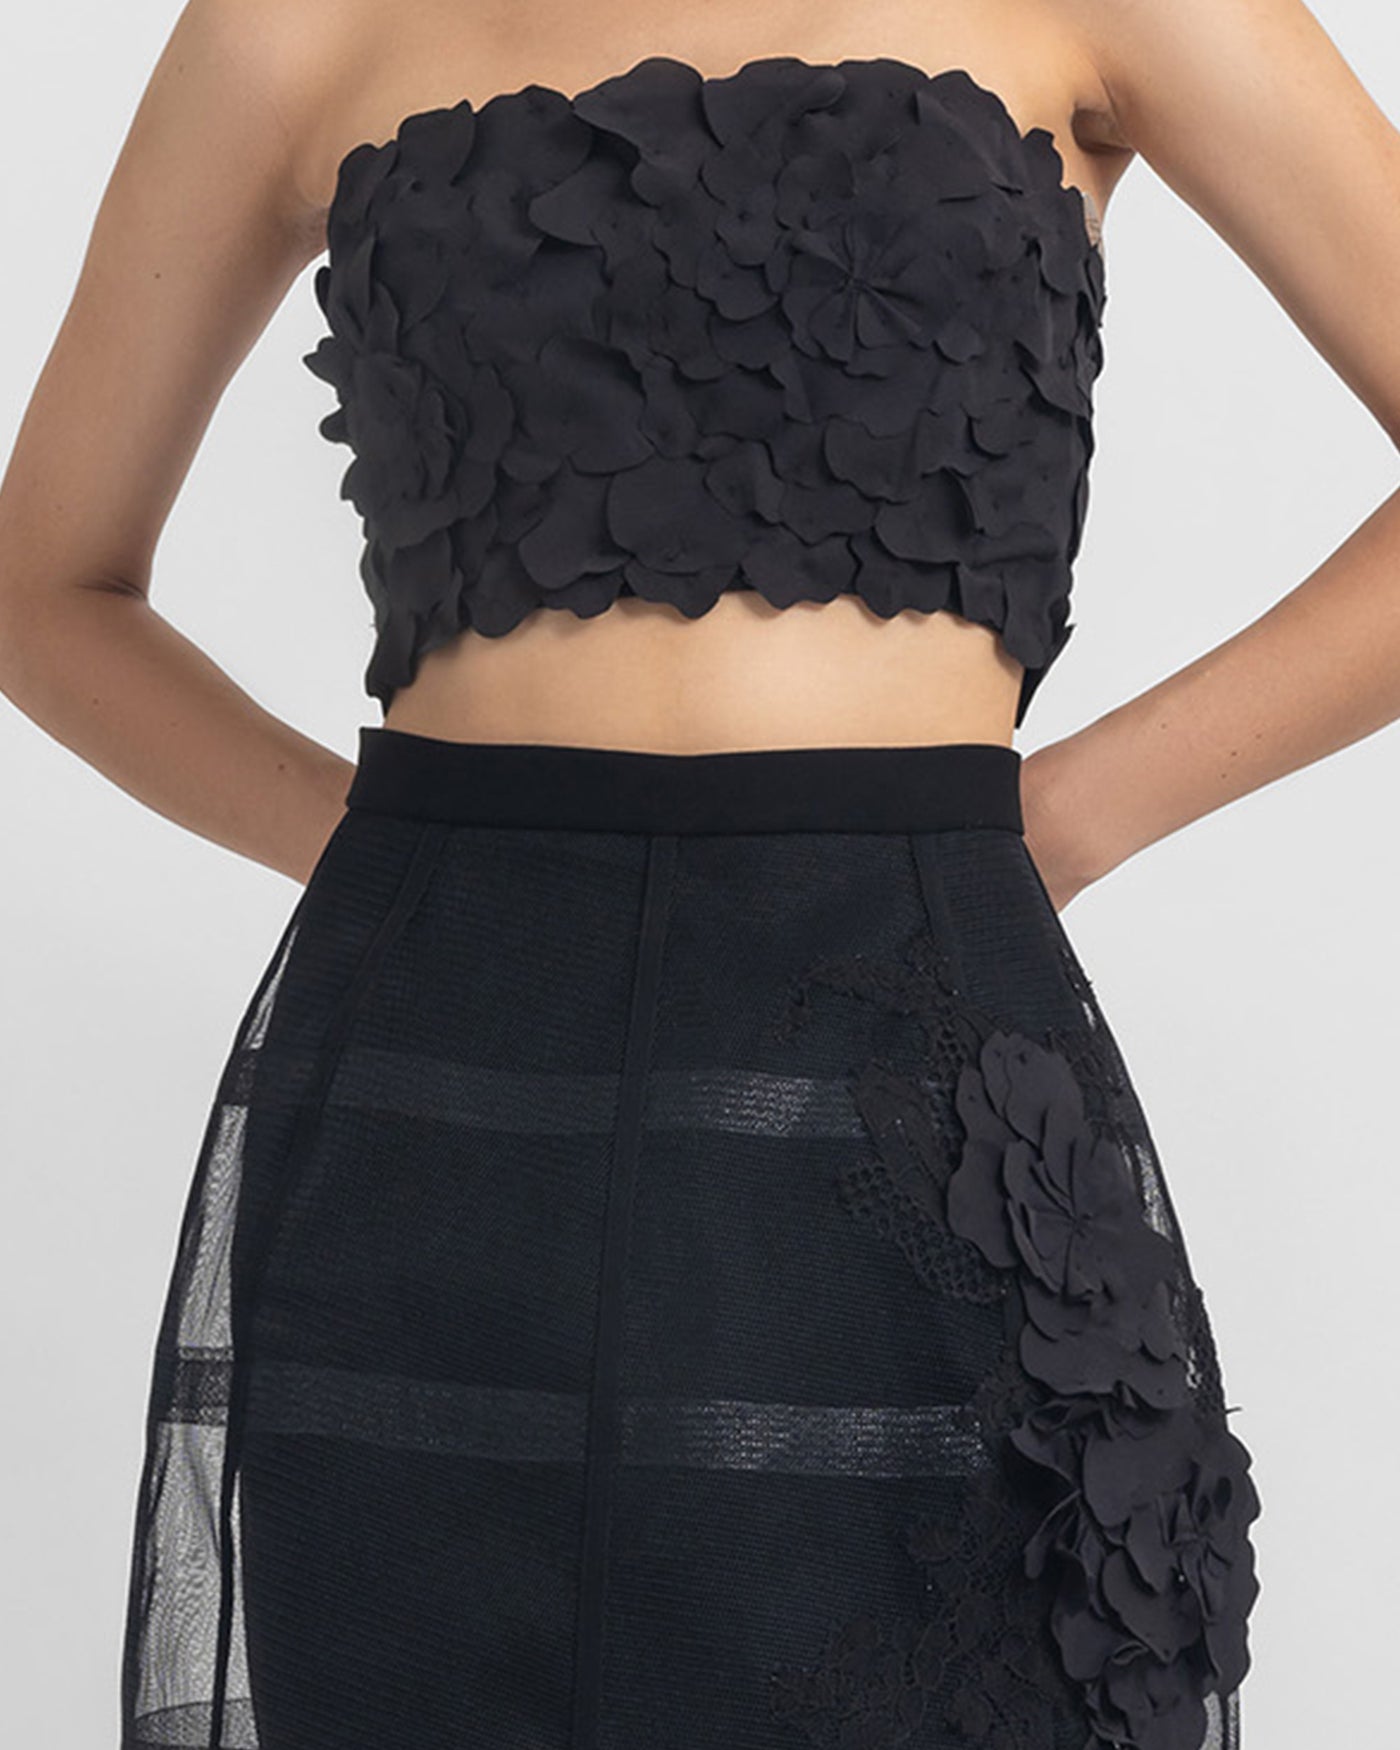 Laser-Cut Top & Cage-Like Skirt